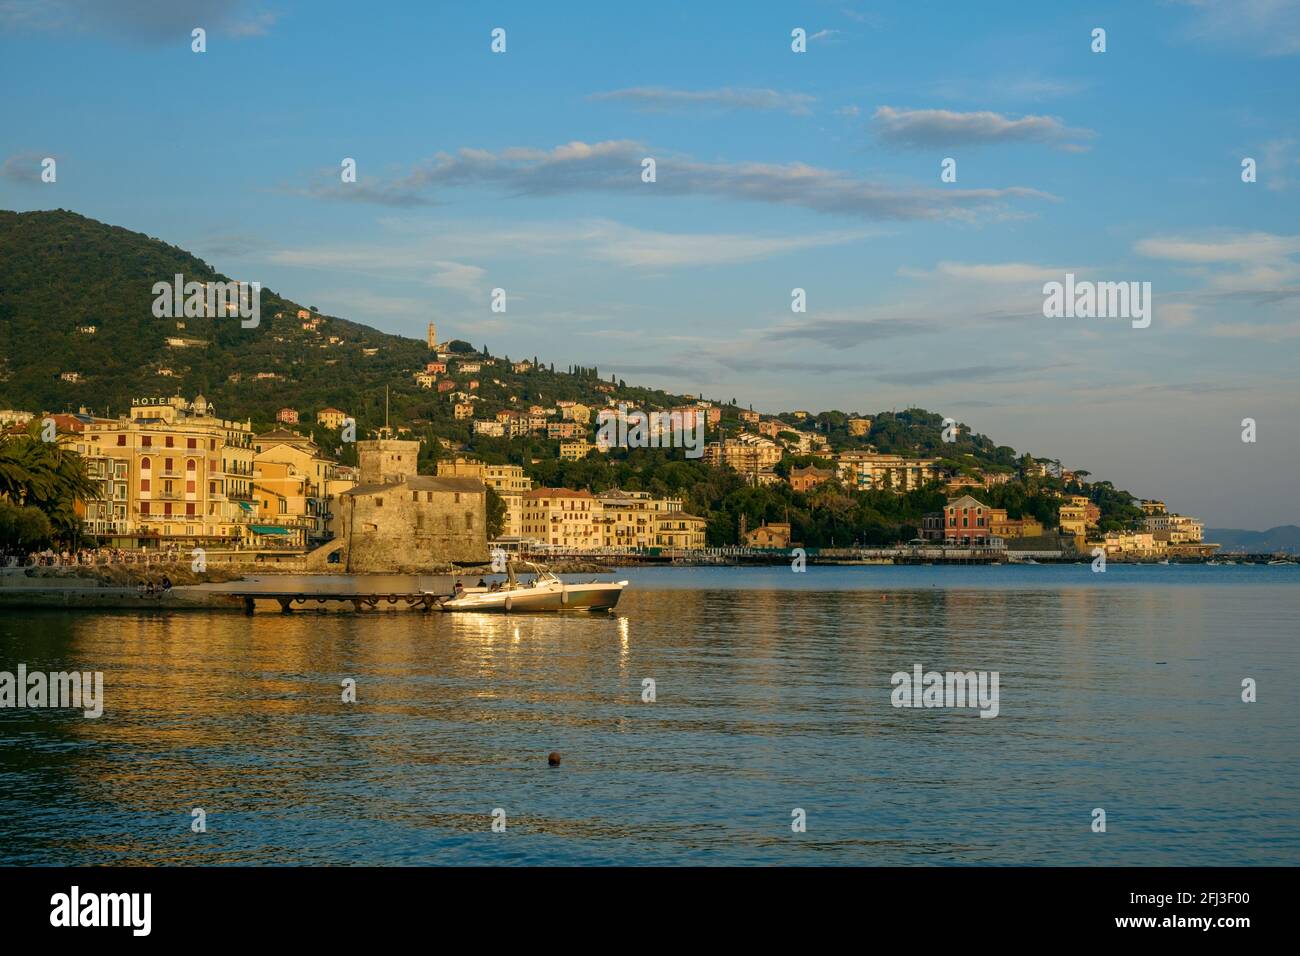 Peaceful Ligurian sea at the coastline of Rapallo. On land and behind the castle, buidlings are built on a forested hill. Stock Photo